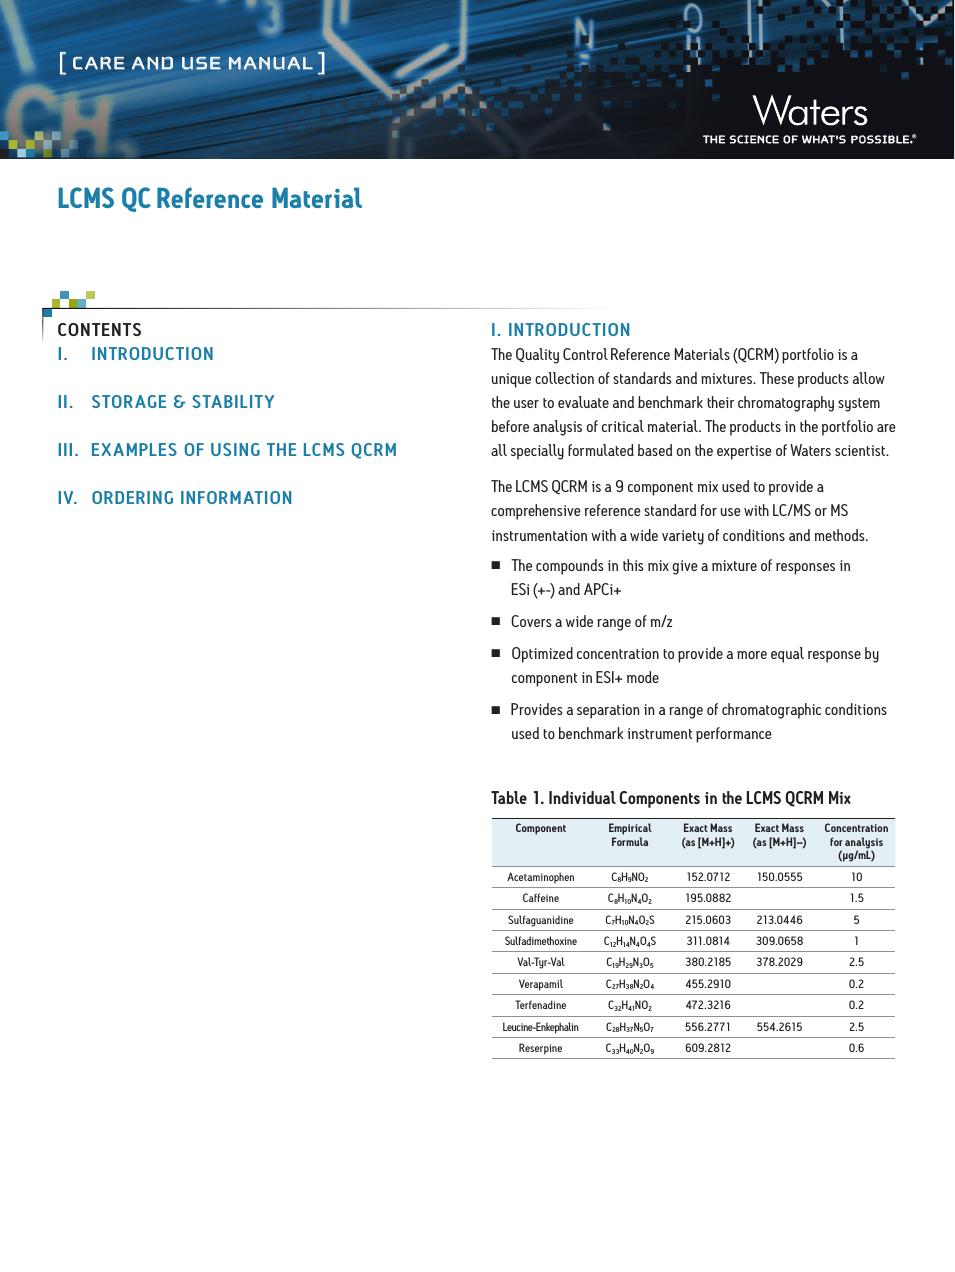 LCMS Quality Control Reference Materials